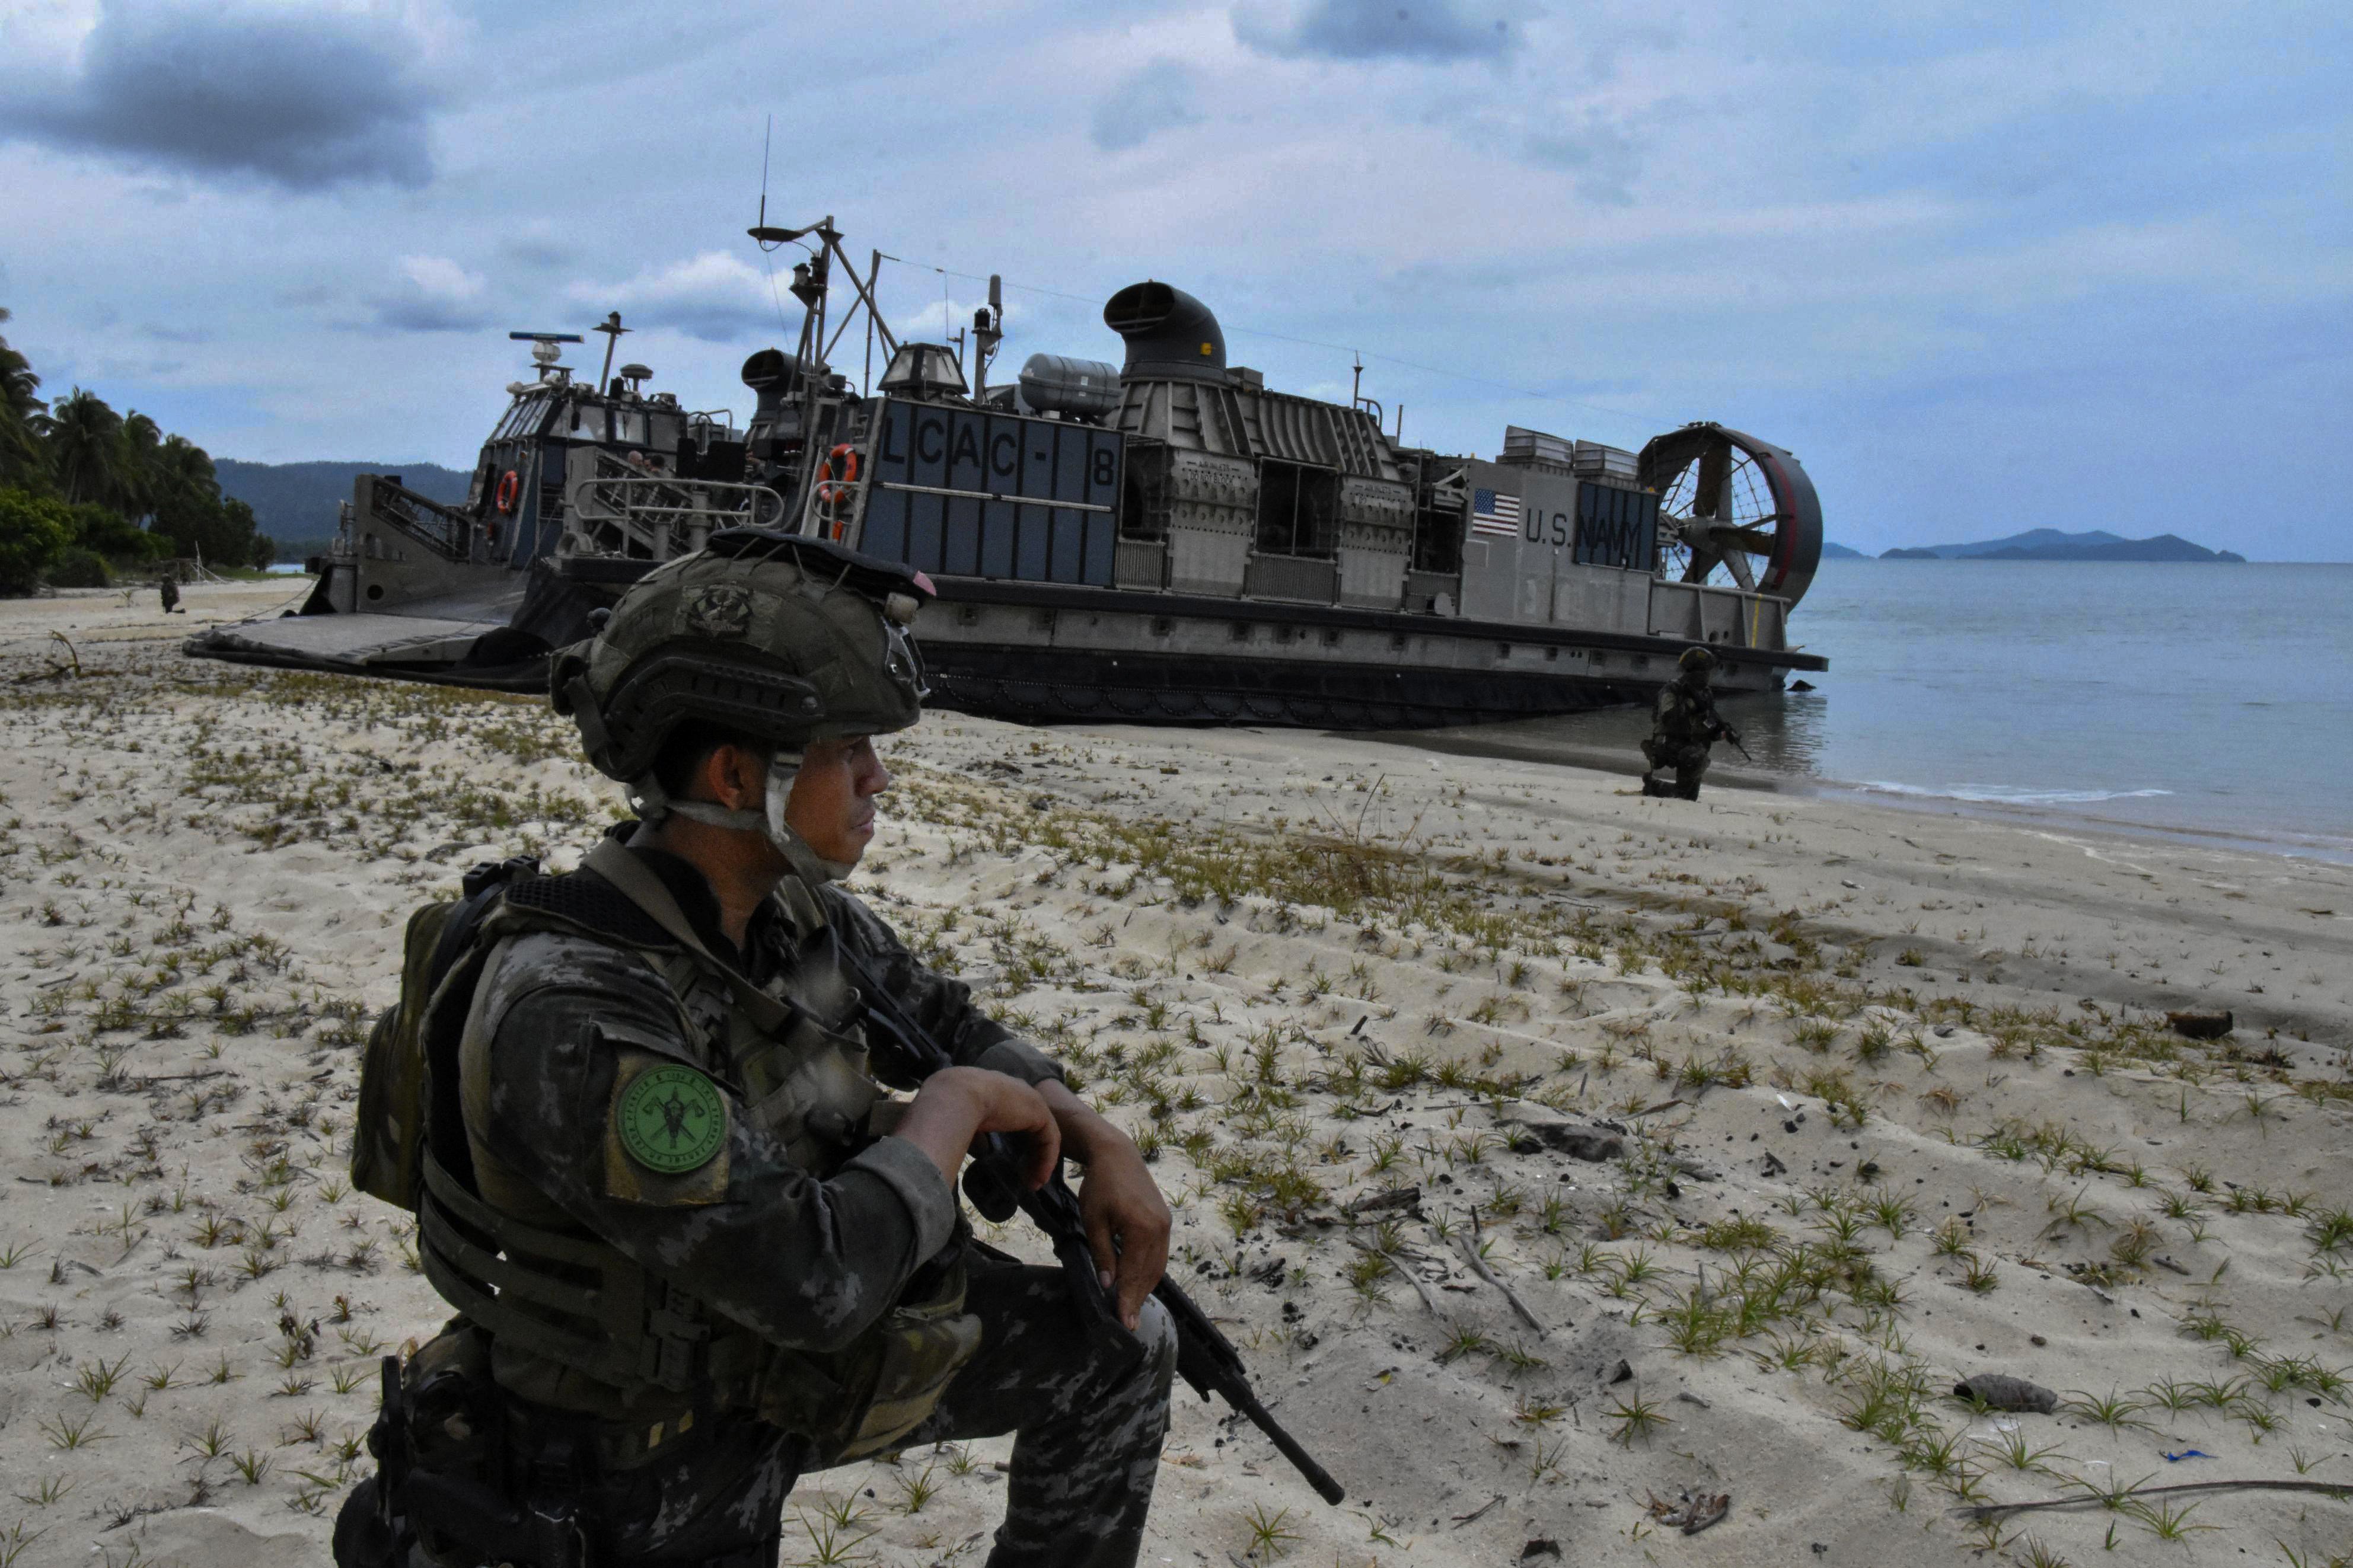 A Philippine soldier guards a US military hovercraft during the annual “Balikatan” bilateral military exercise. The Typhon system was deployed during the three-week exercise involving thousands of troops on either side. Photo: Kyodo